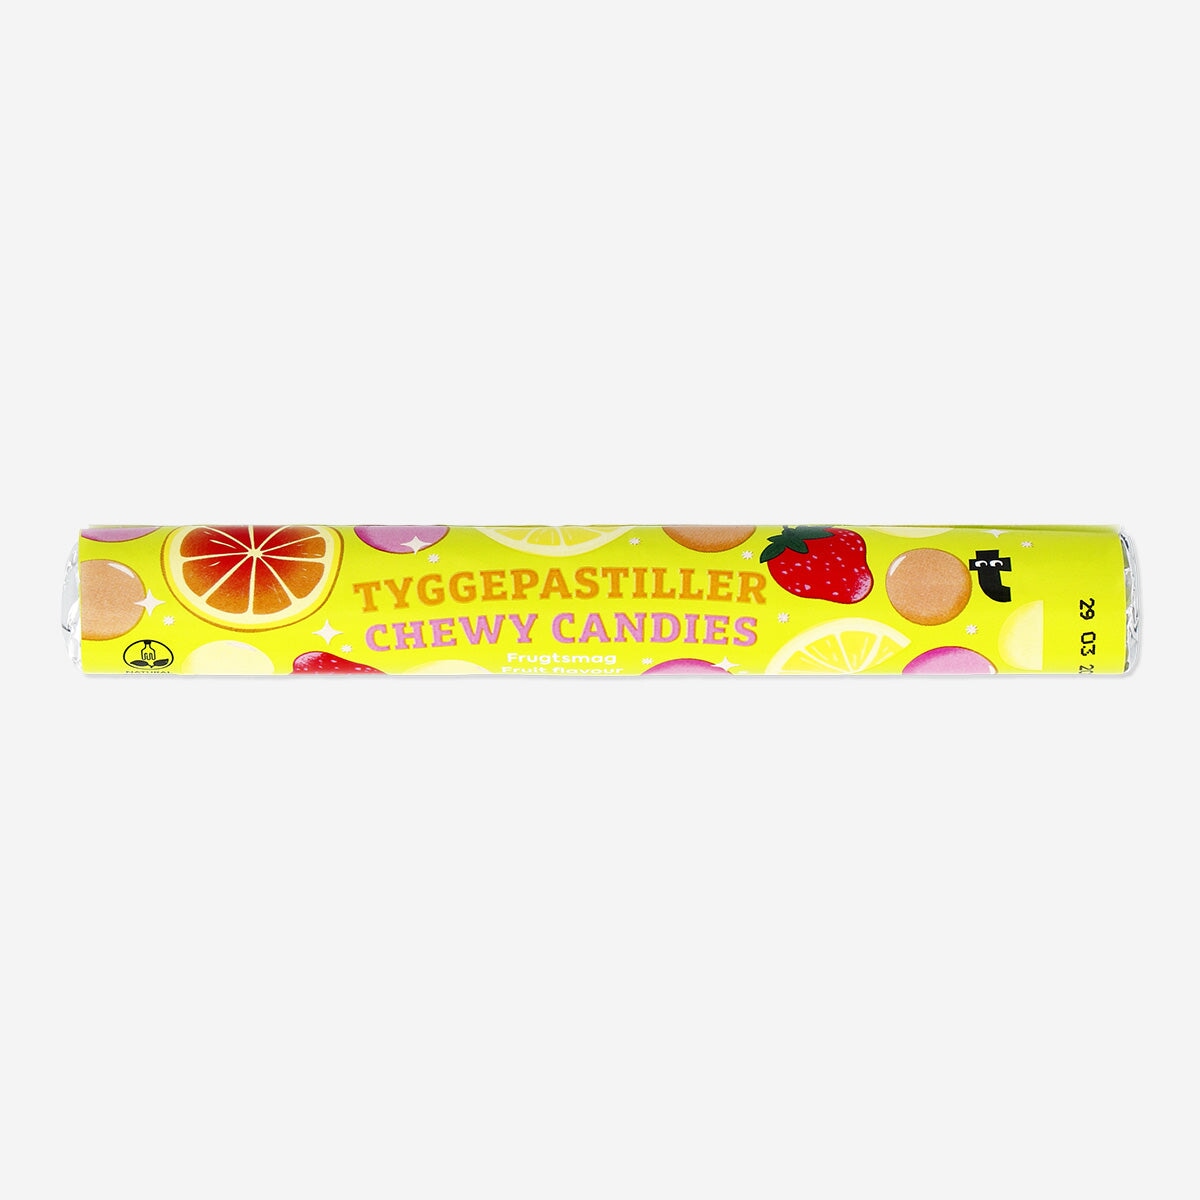 Candy chewy roll. Fruit flavour Food Flying Tiger Copenhagen 